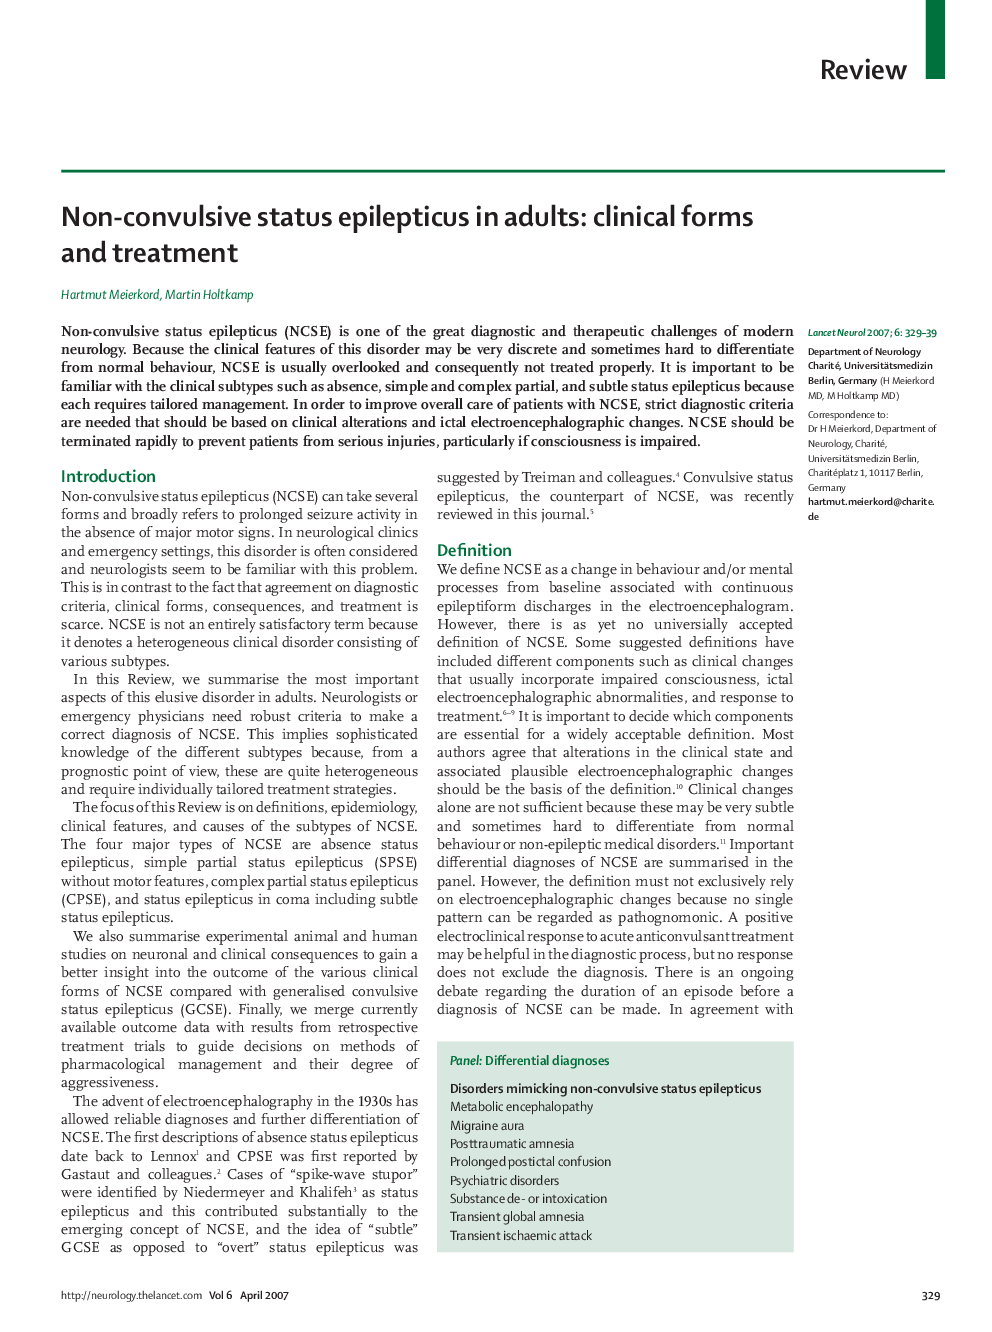 Non-convulsive status epilepticus in adults: clinical forms and treatment